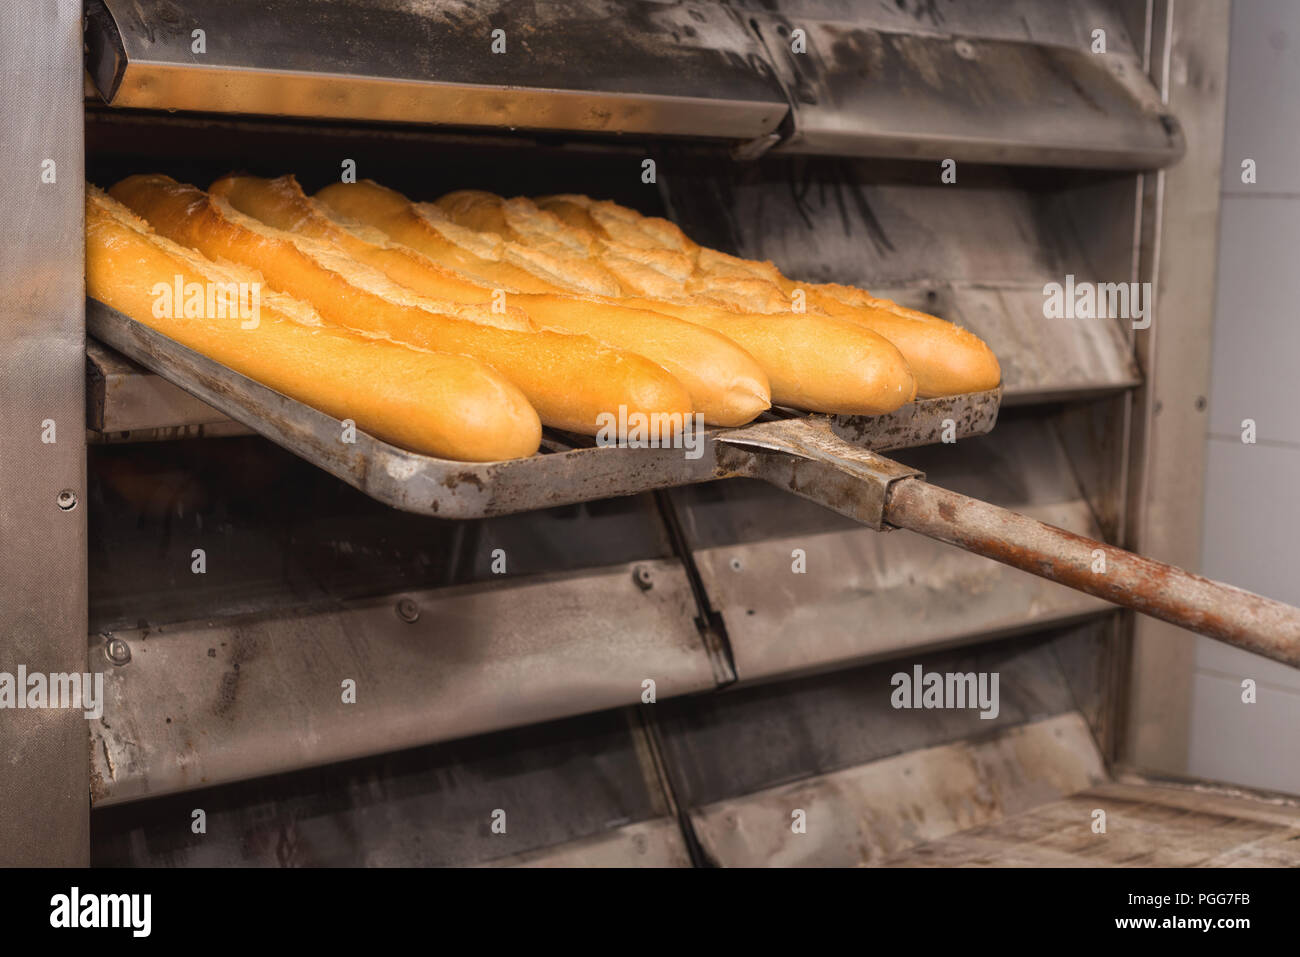 Baker taking out freshly baked bread from the oven of a bakery stock photo